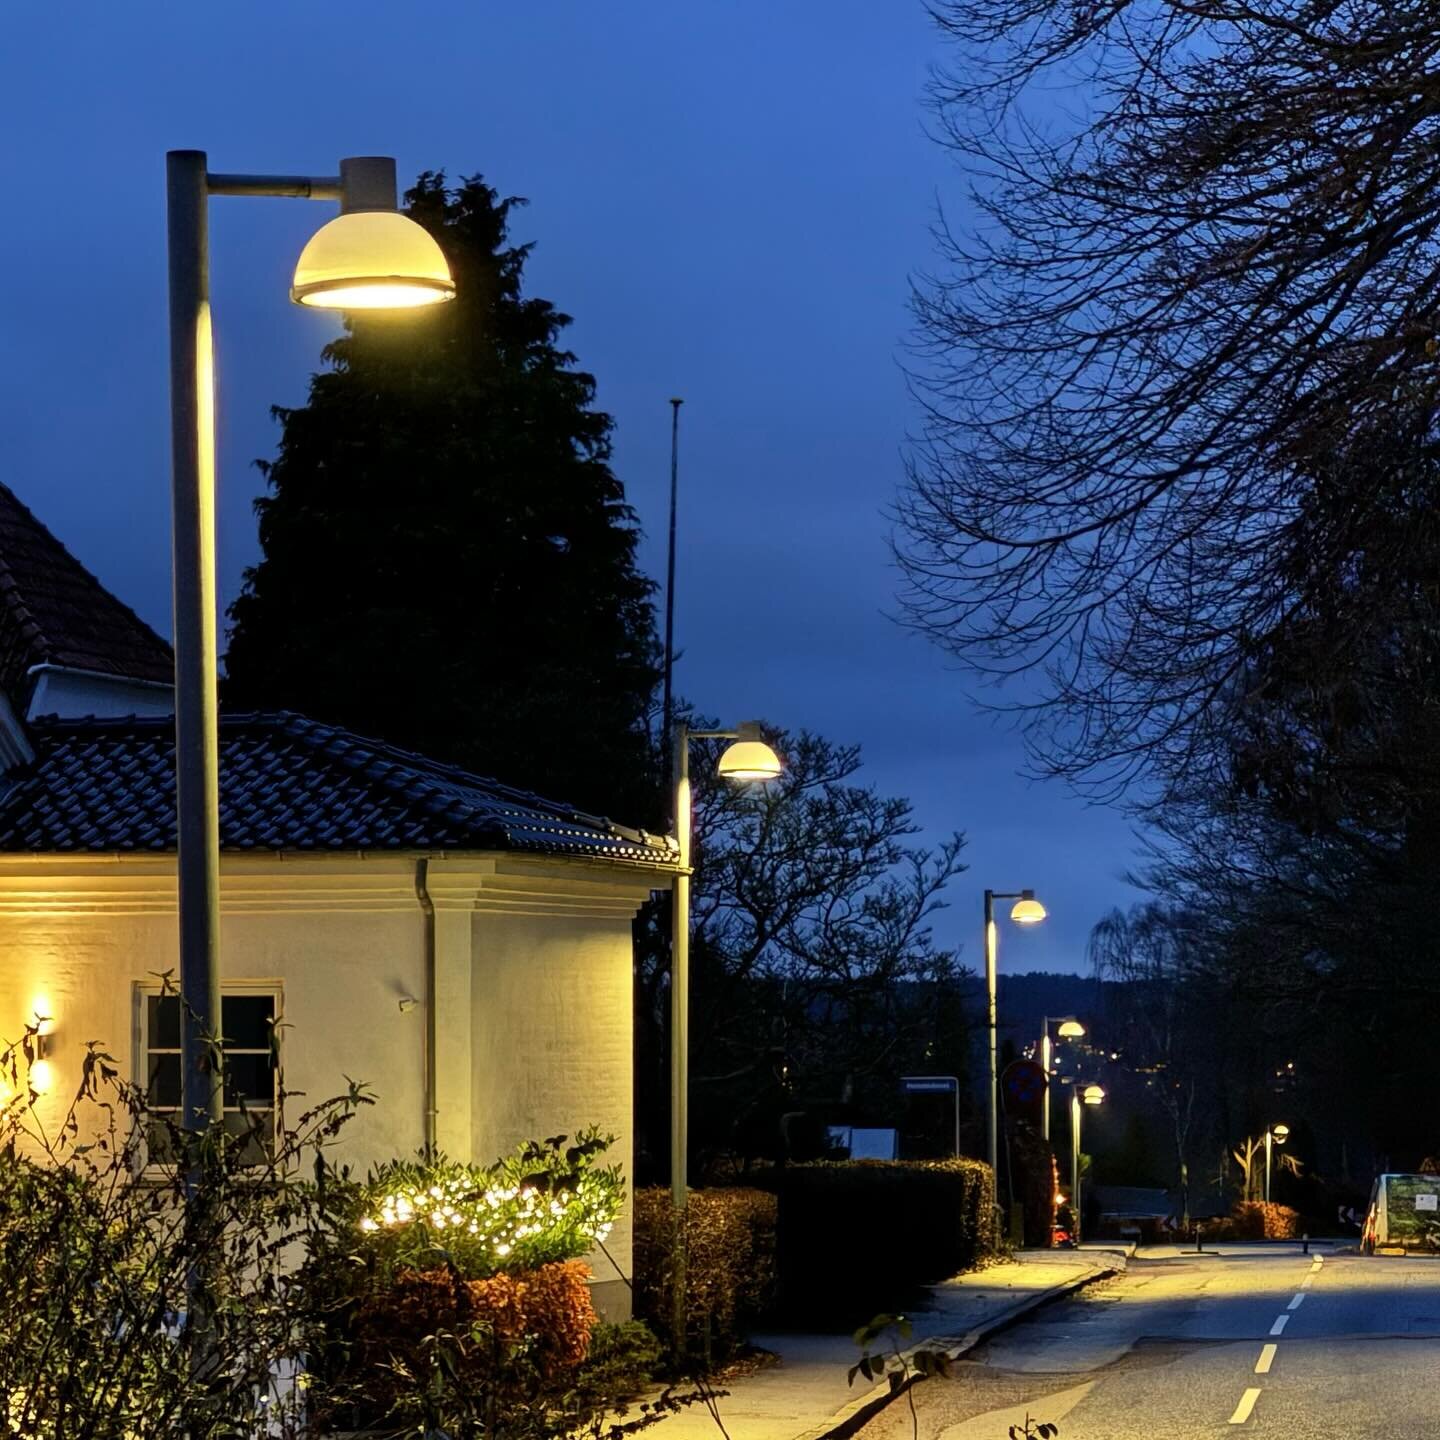 The light&rsquo;s expression of quality 
starts during the day
Proved at night and 20 years ahead 
The first lights of a series 
are established around the queen&rsquo;s castle 
in Fredensborg
The right light provides 
care in public spaces
@louispou